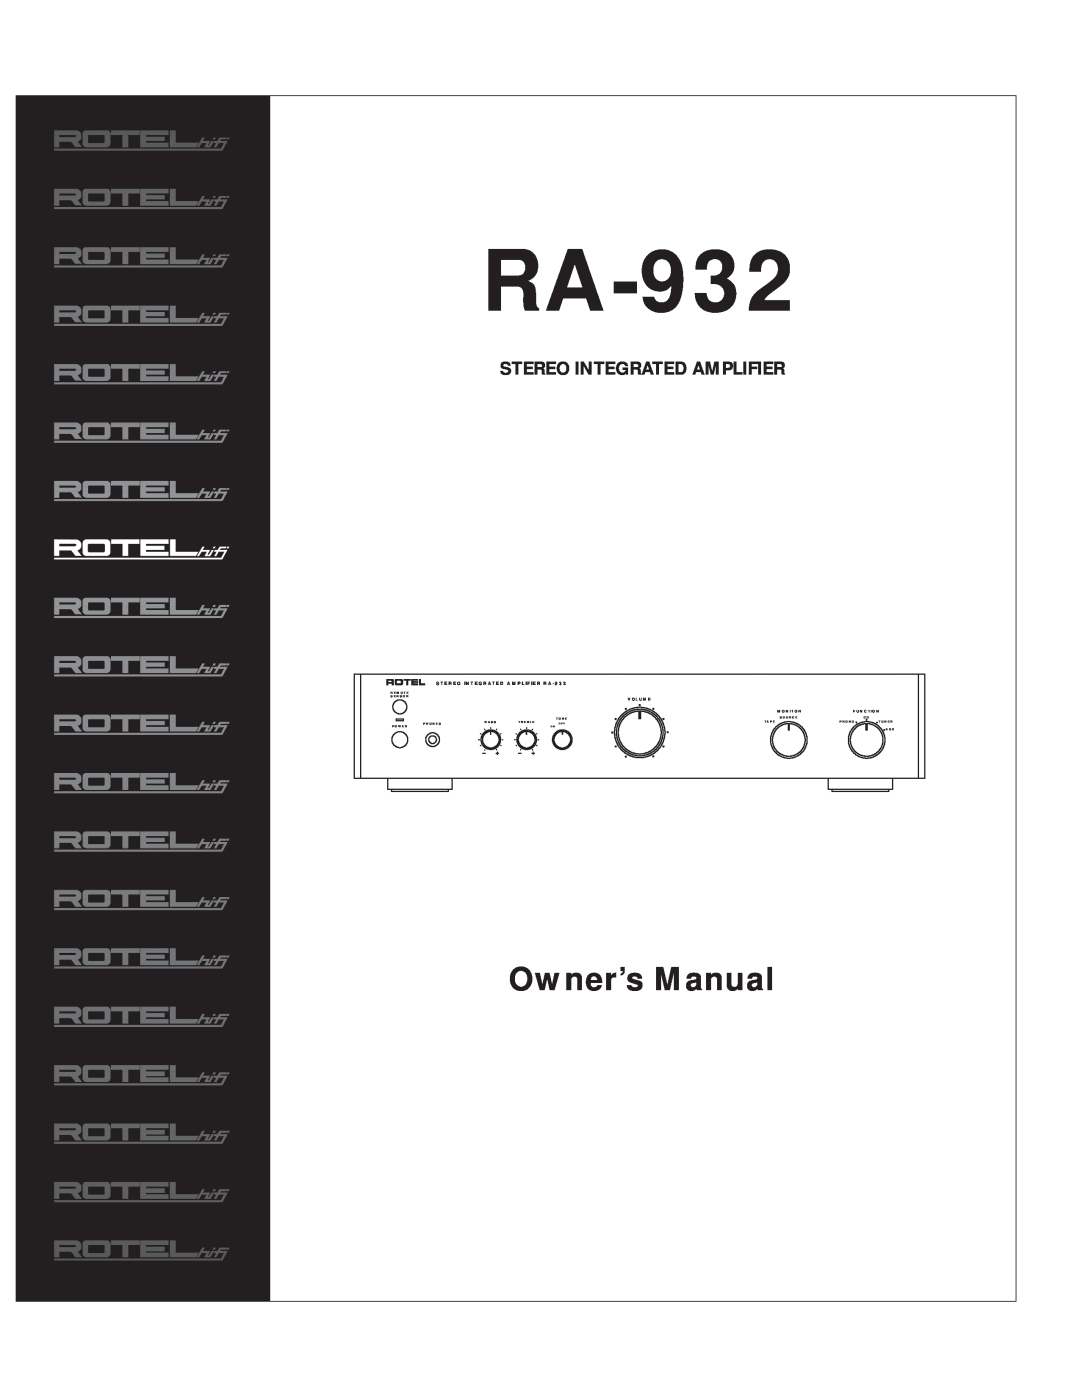 Rotel RA-932 owner manual Stereo Integrated Amplifier, Remote Sensor, Tone, Source, Phones, Bass, Treble, Tape, Phono 